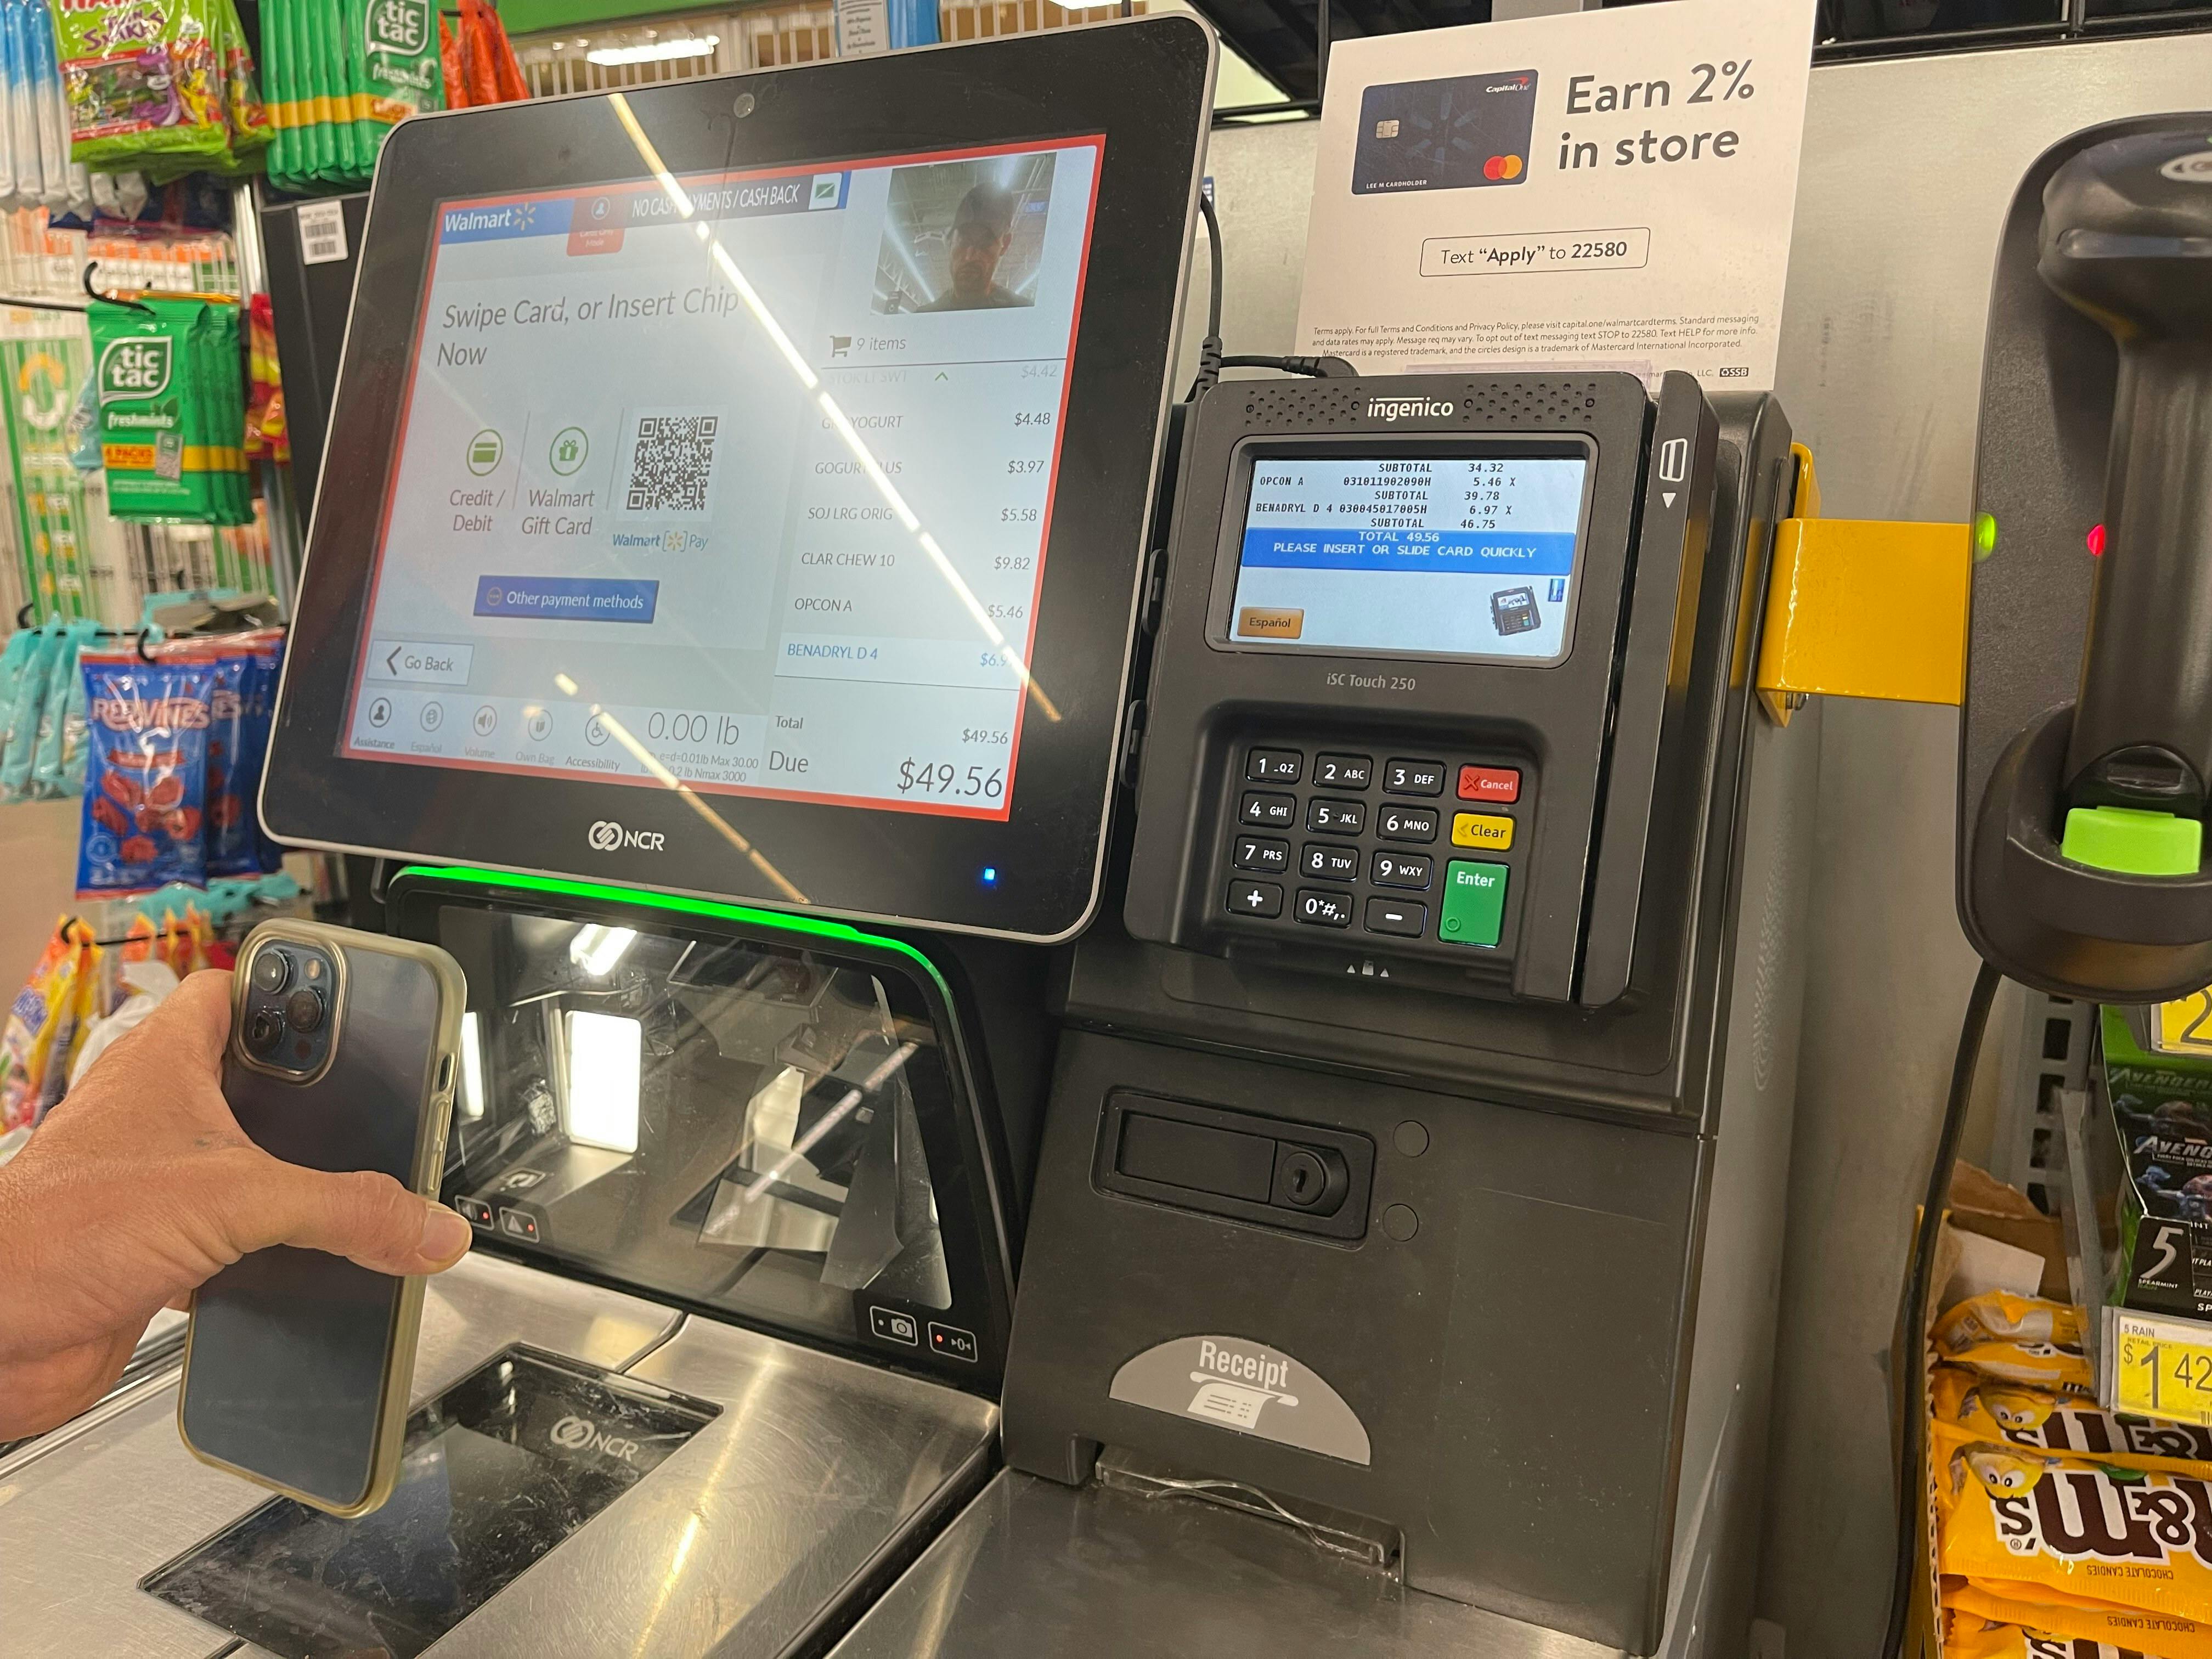 cellphone being scanned at walmart self check out